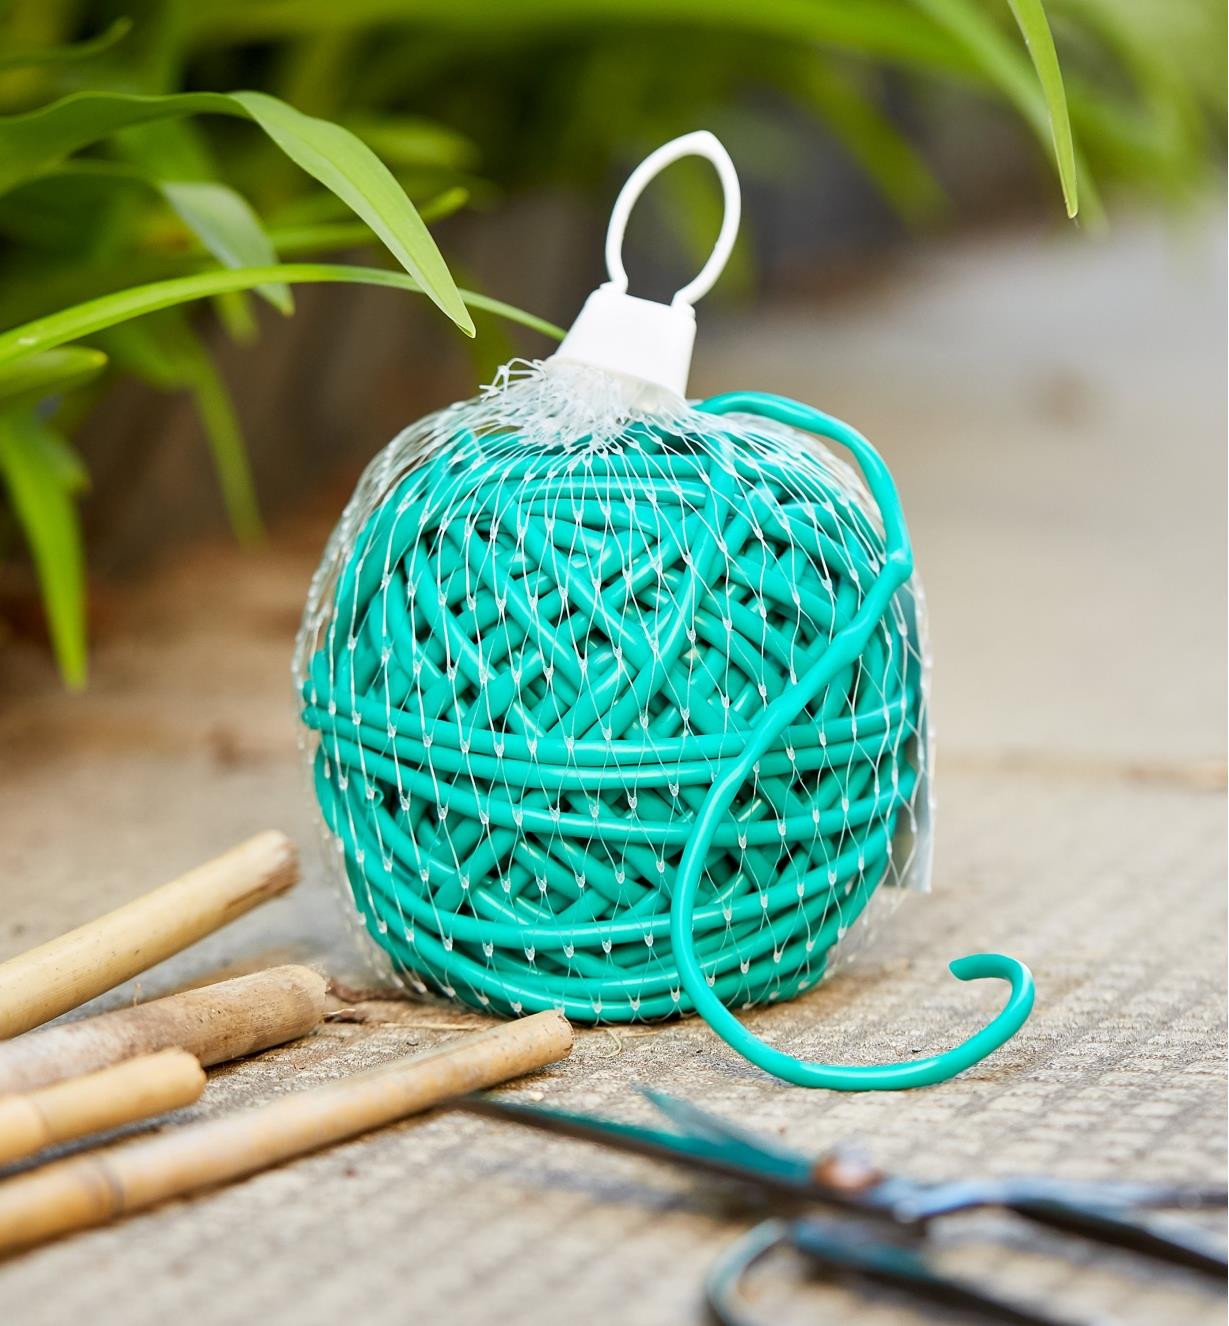 A 100' bundle of soft-stretch plant tie shown with bamboo garden stakes and a pair of scissors